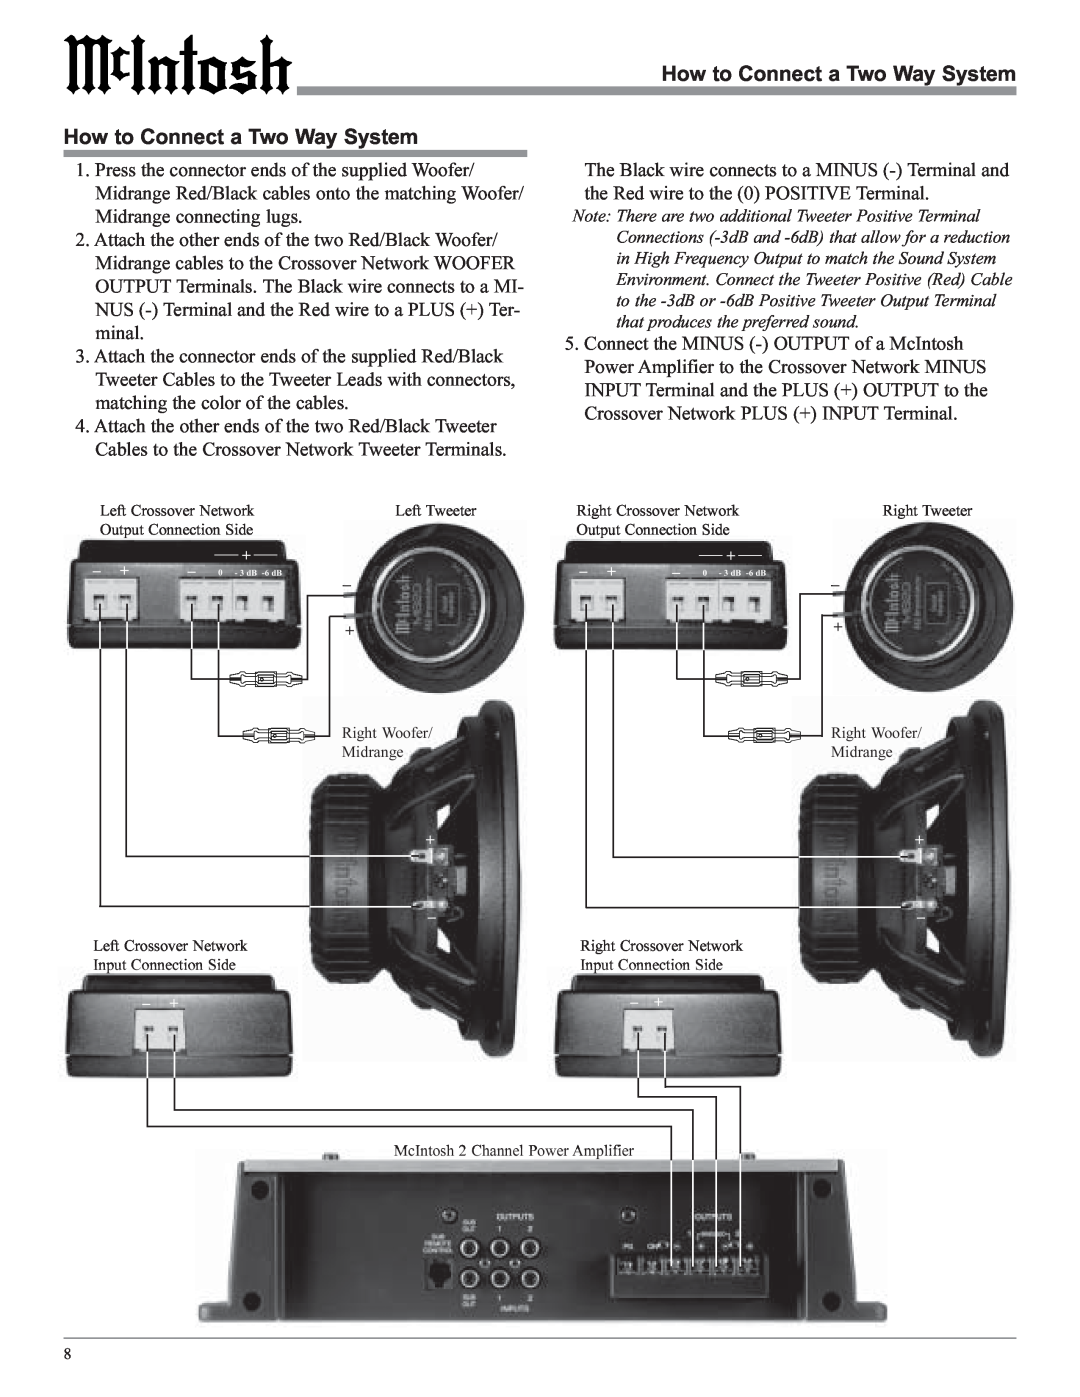 McIntosh MSS630, MSS530 owner manual How to Connect a Two Way System How to Connect a Two Way System, Right Tweeter 